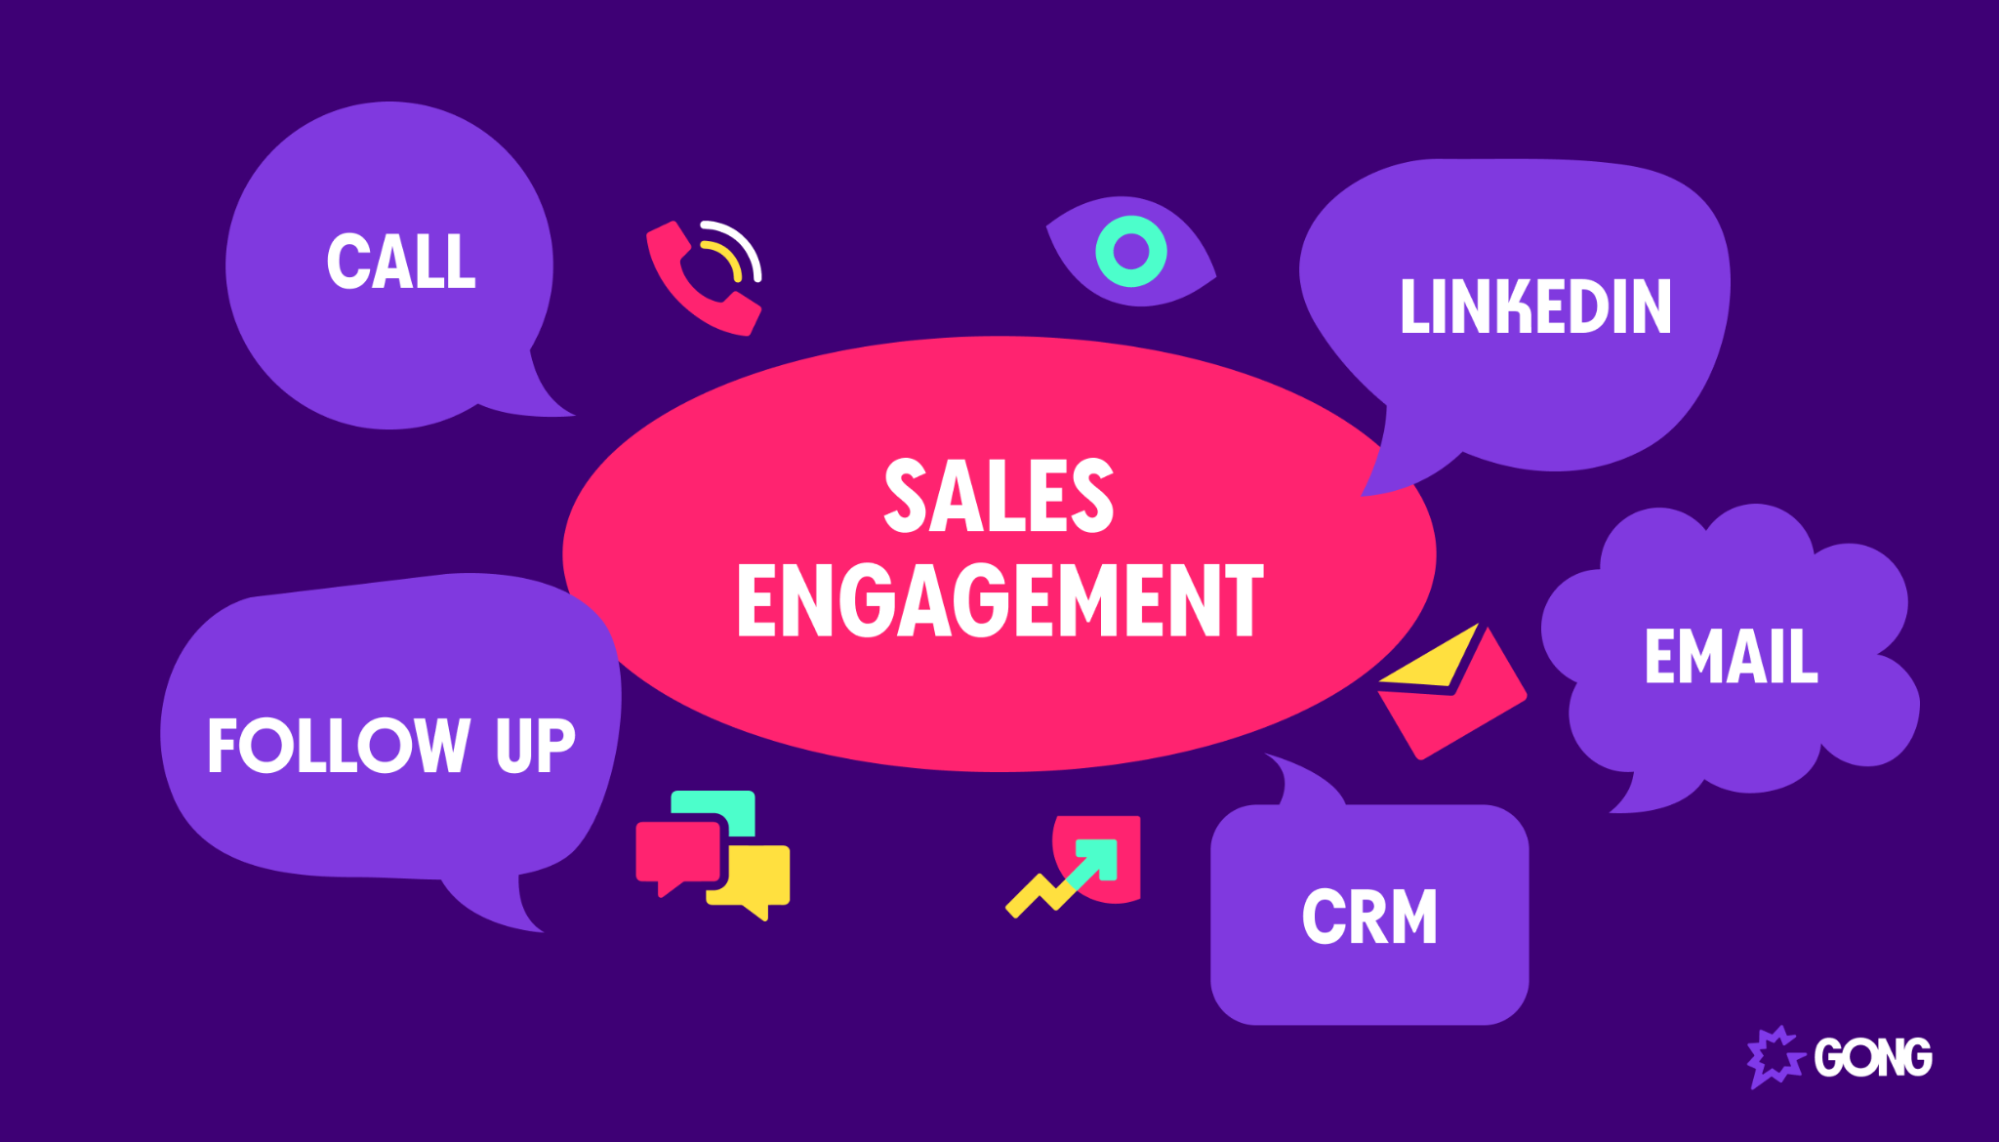 Sales engagement bubble with various contact methods surrounding it